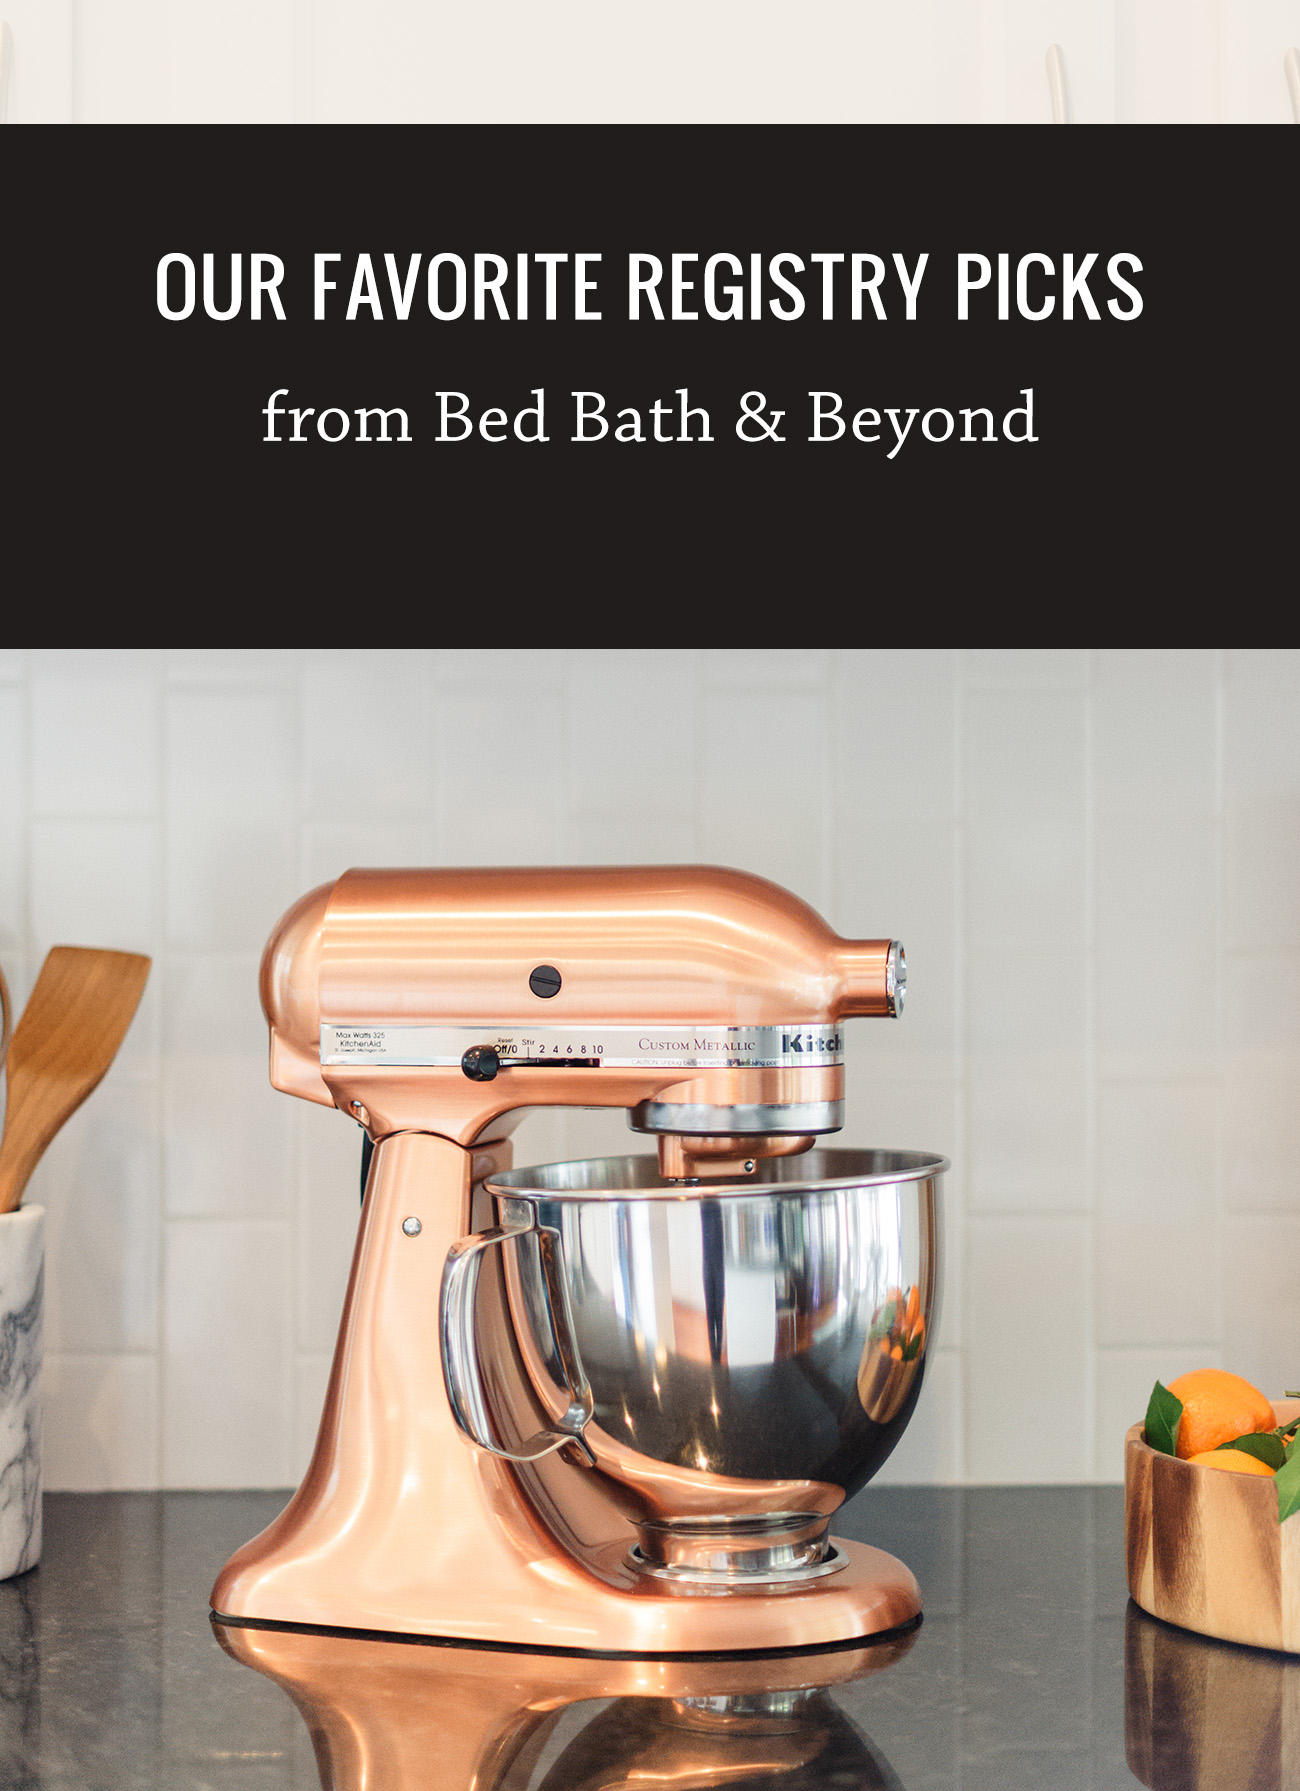 Our Favorite Registry Picks from Bed Bath & Beyond